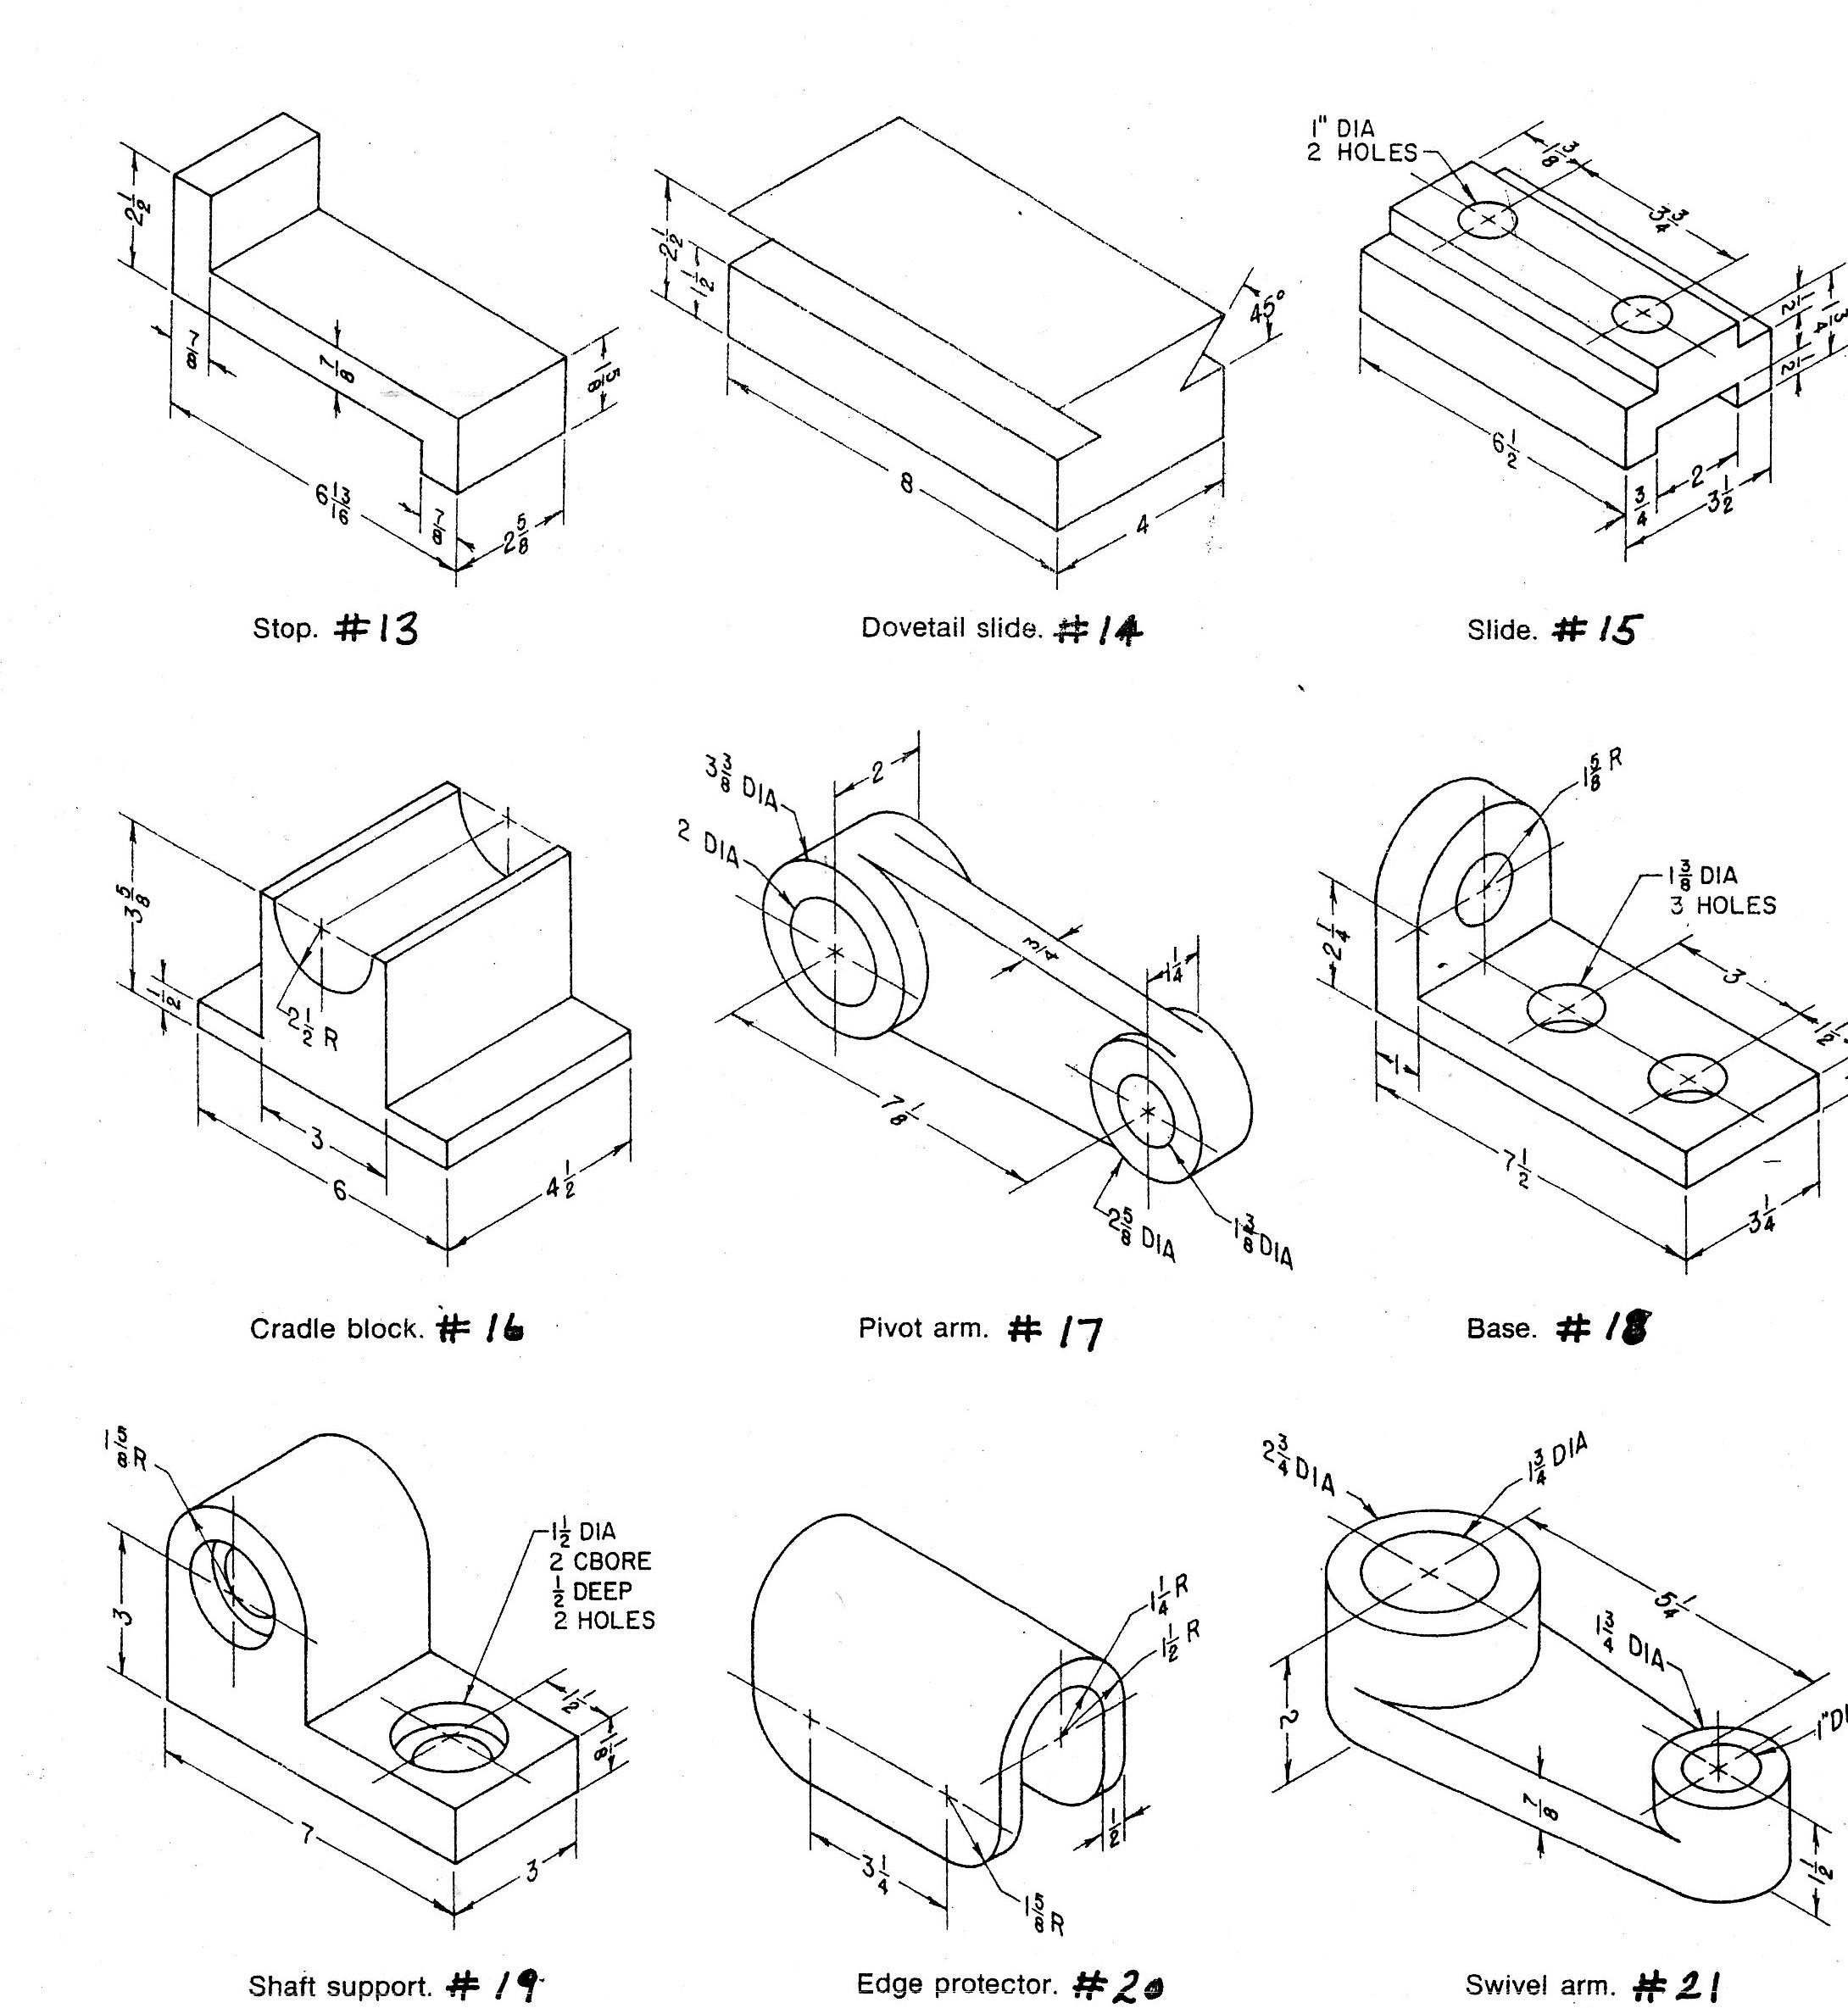 reading isometric pipe drawings